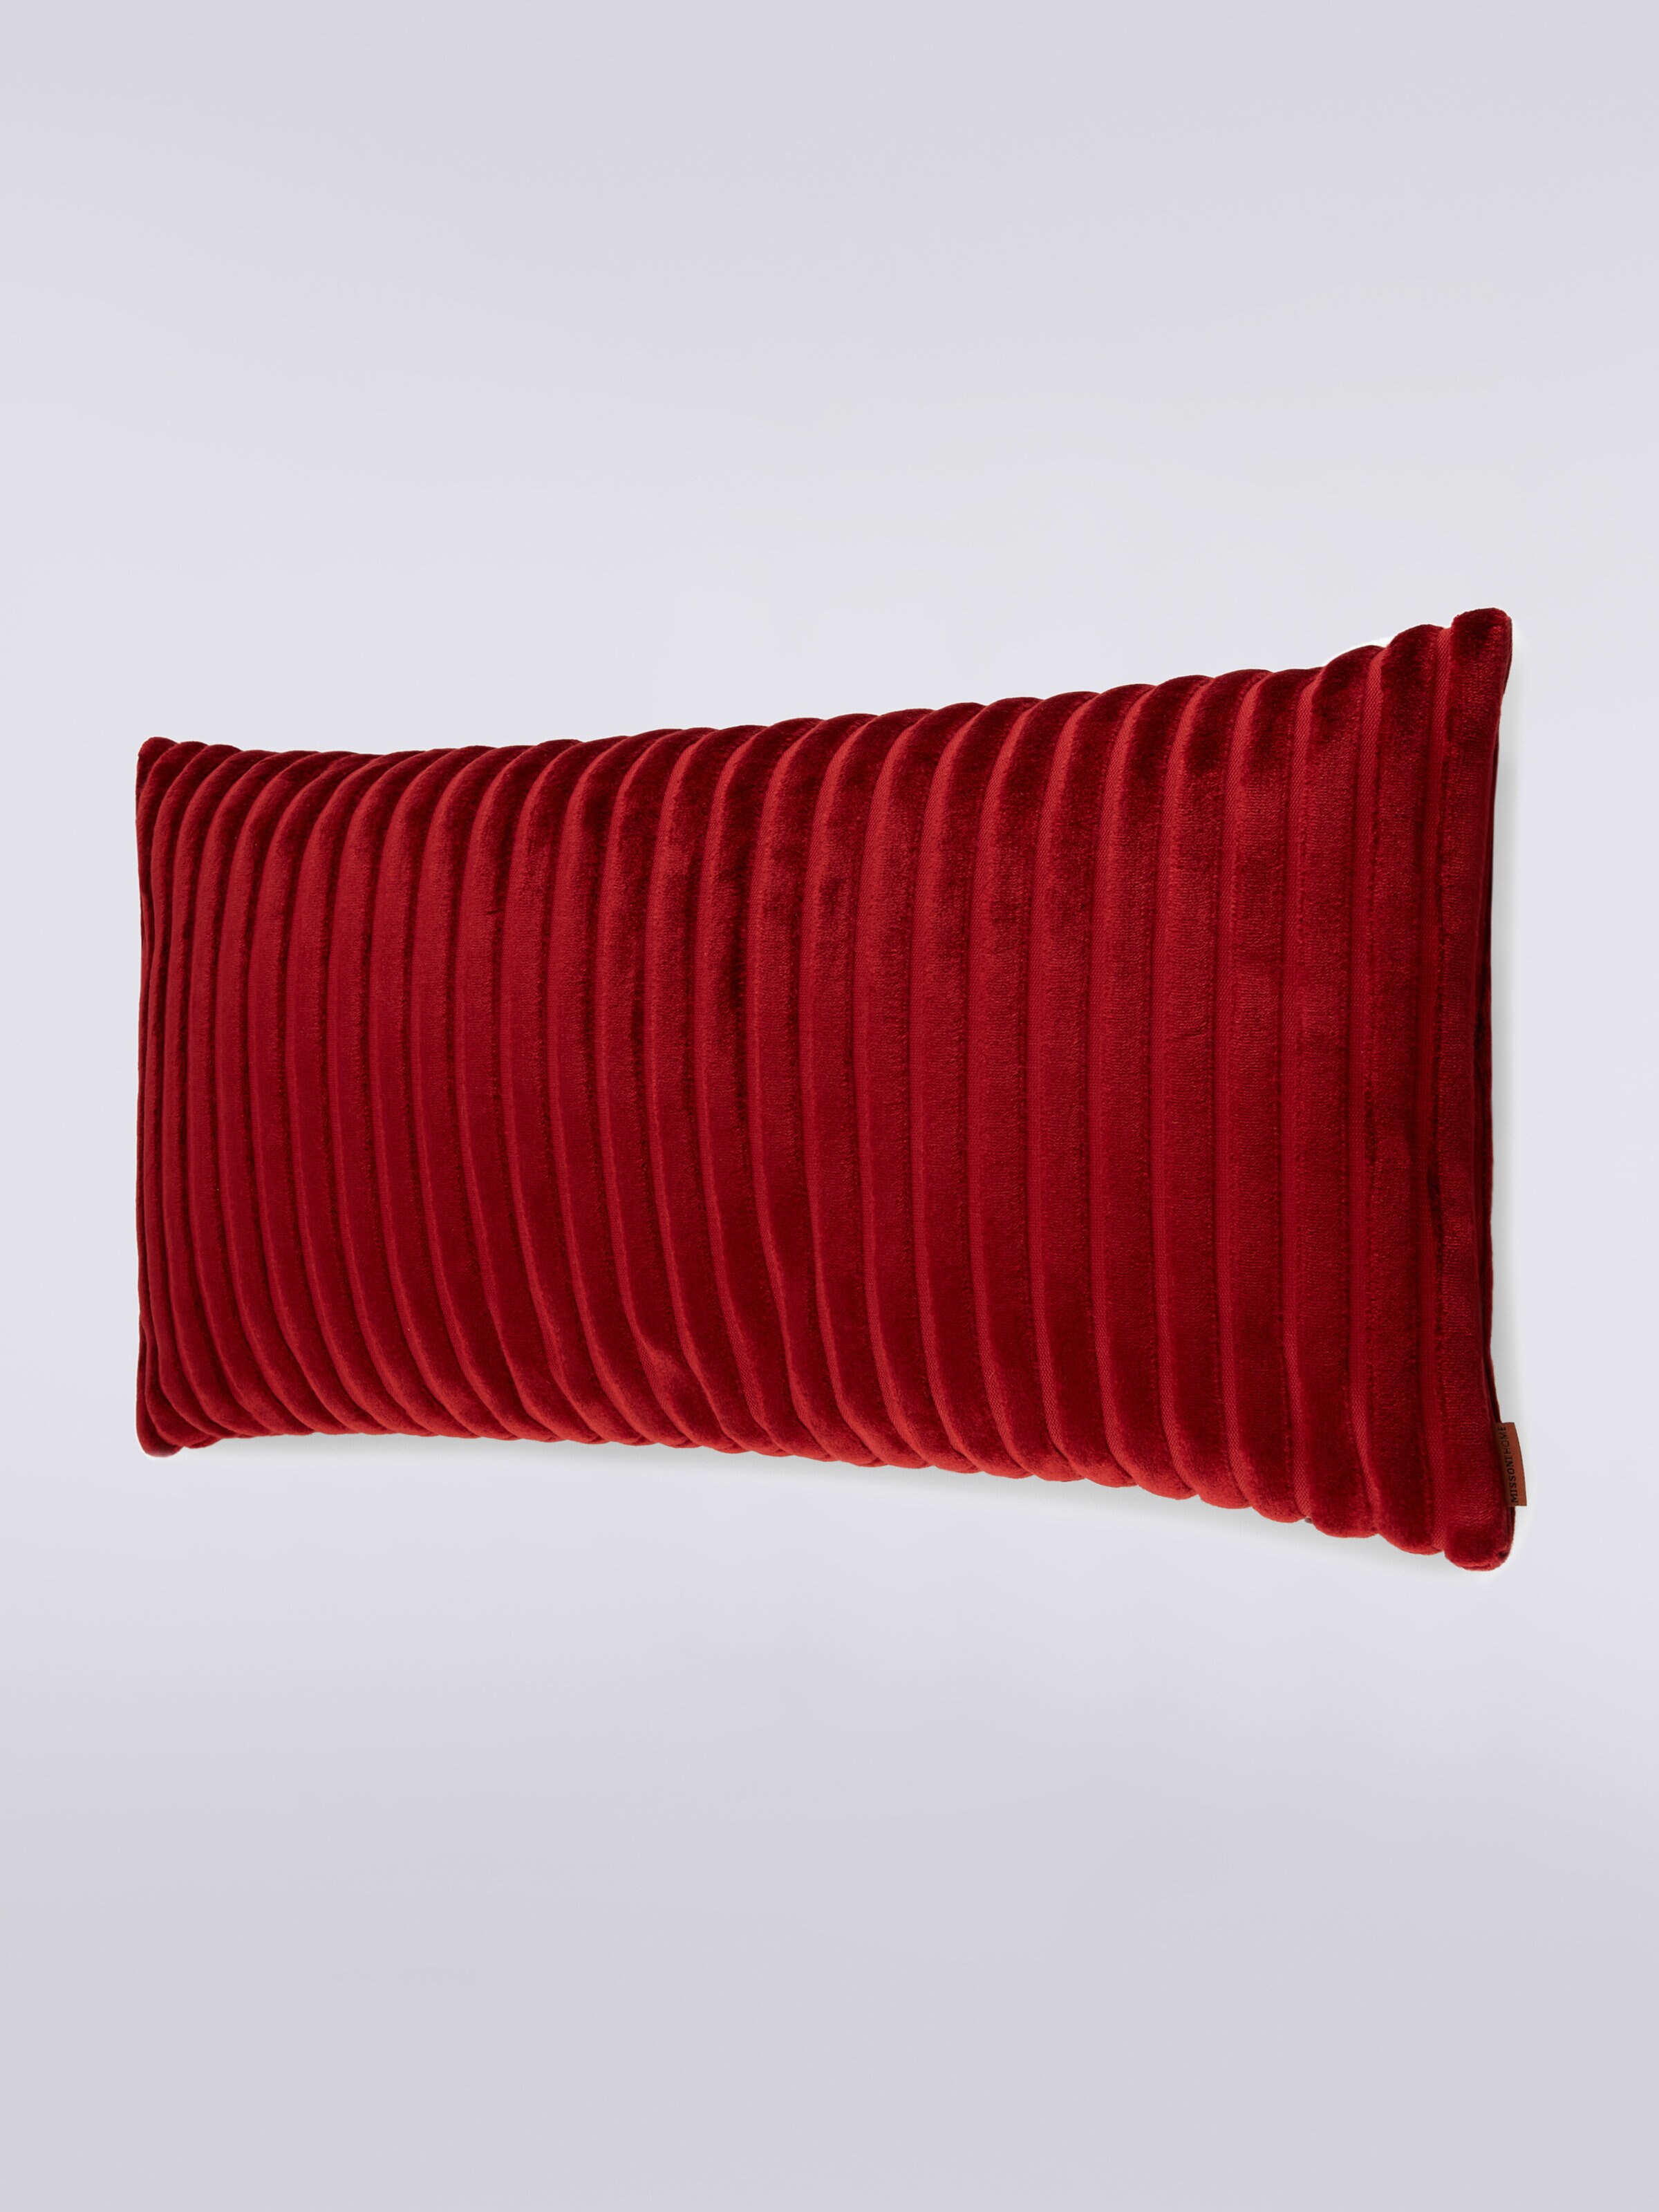 Coomba Cushion 30X60, Red  - 1